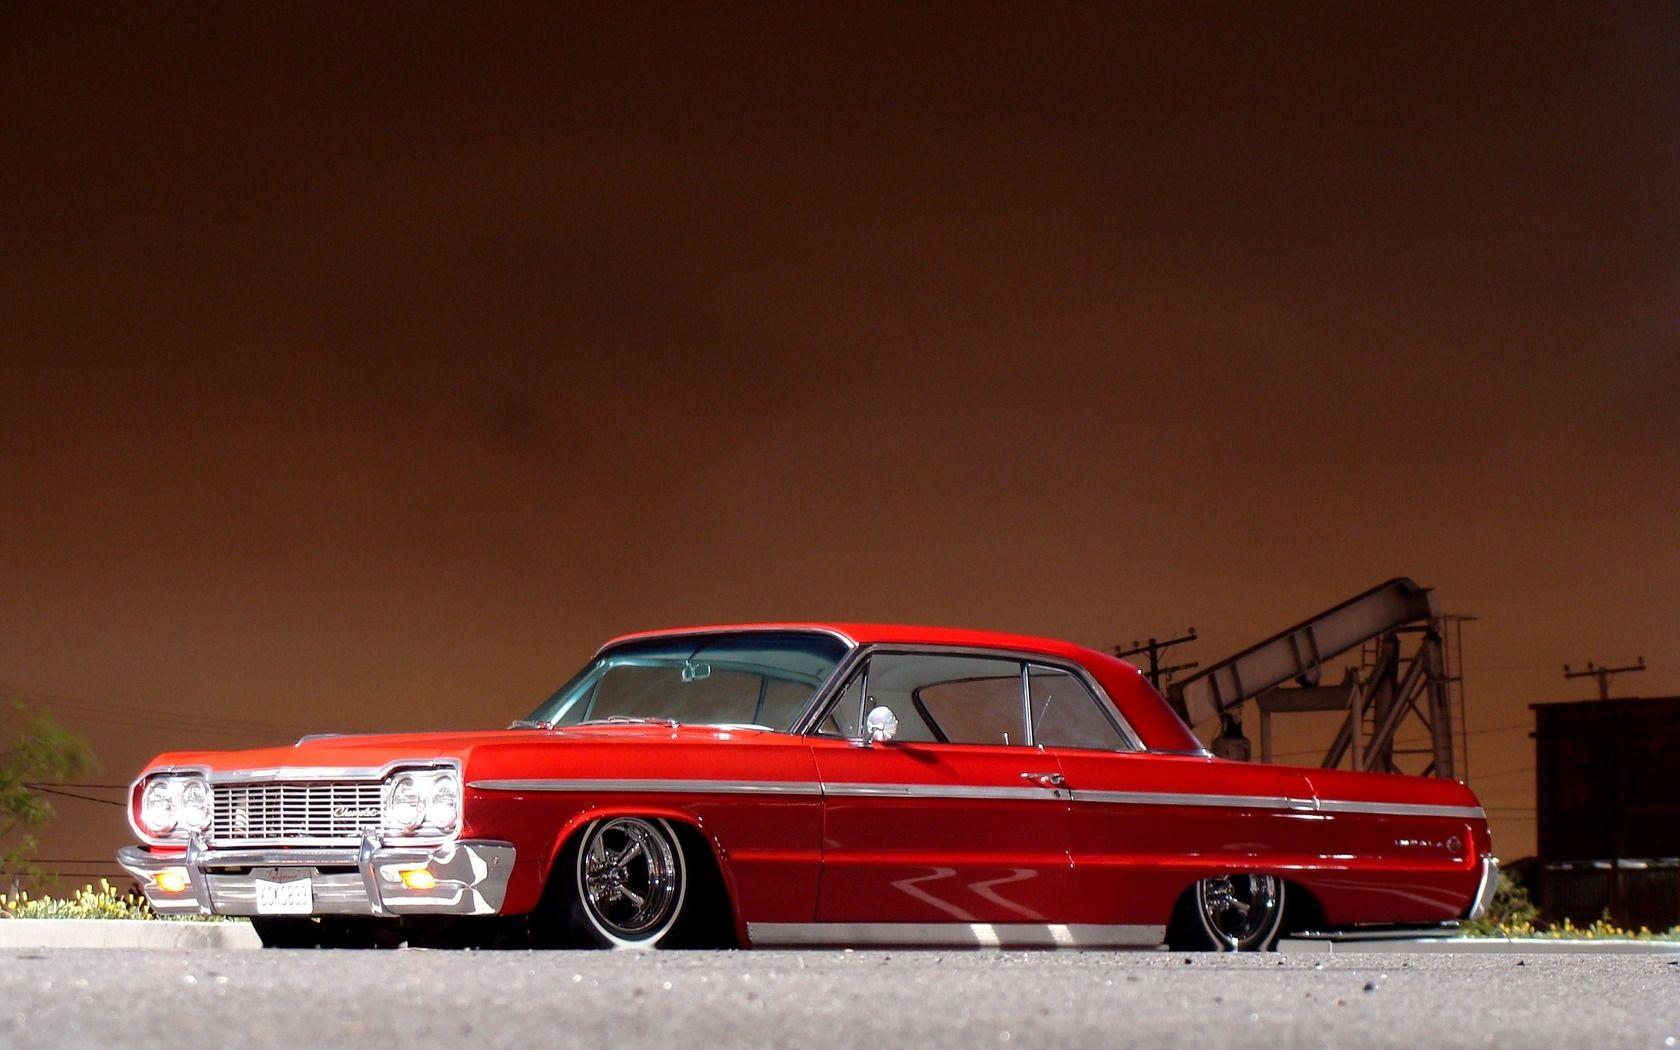 Lowrider HD Wallpaper for PC. HD